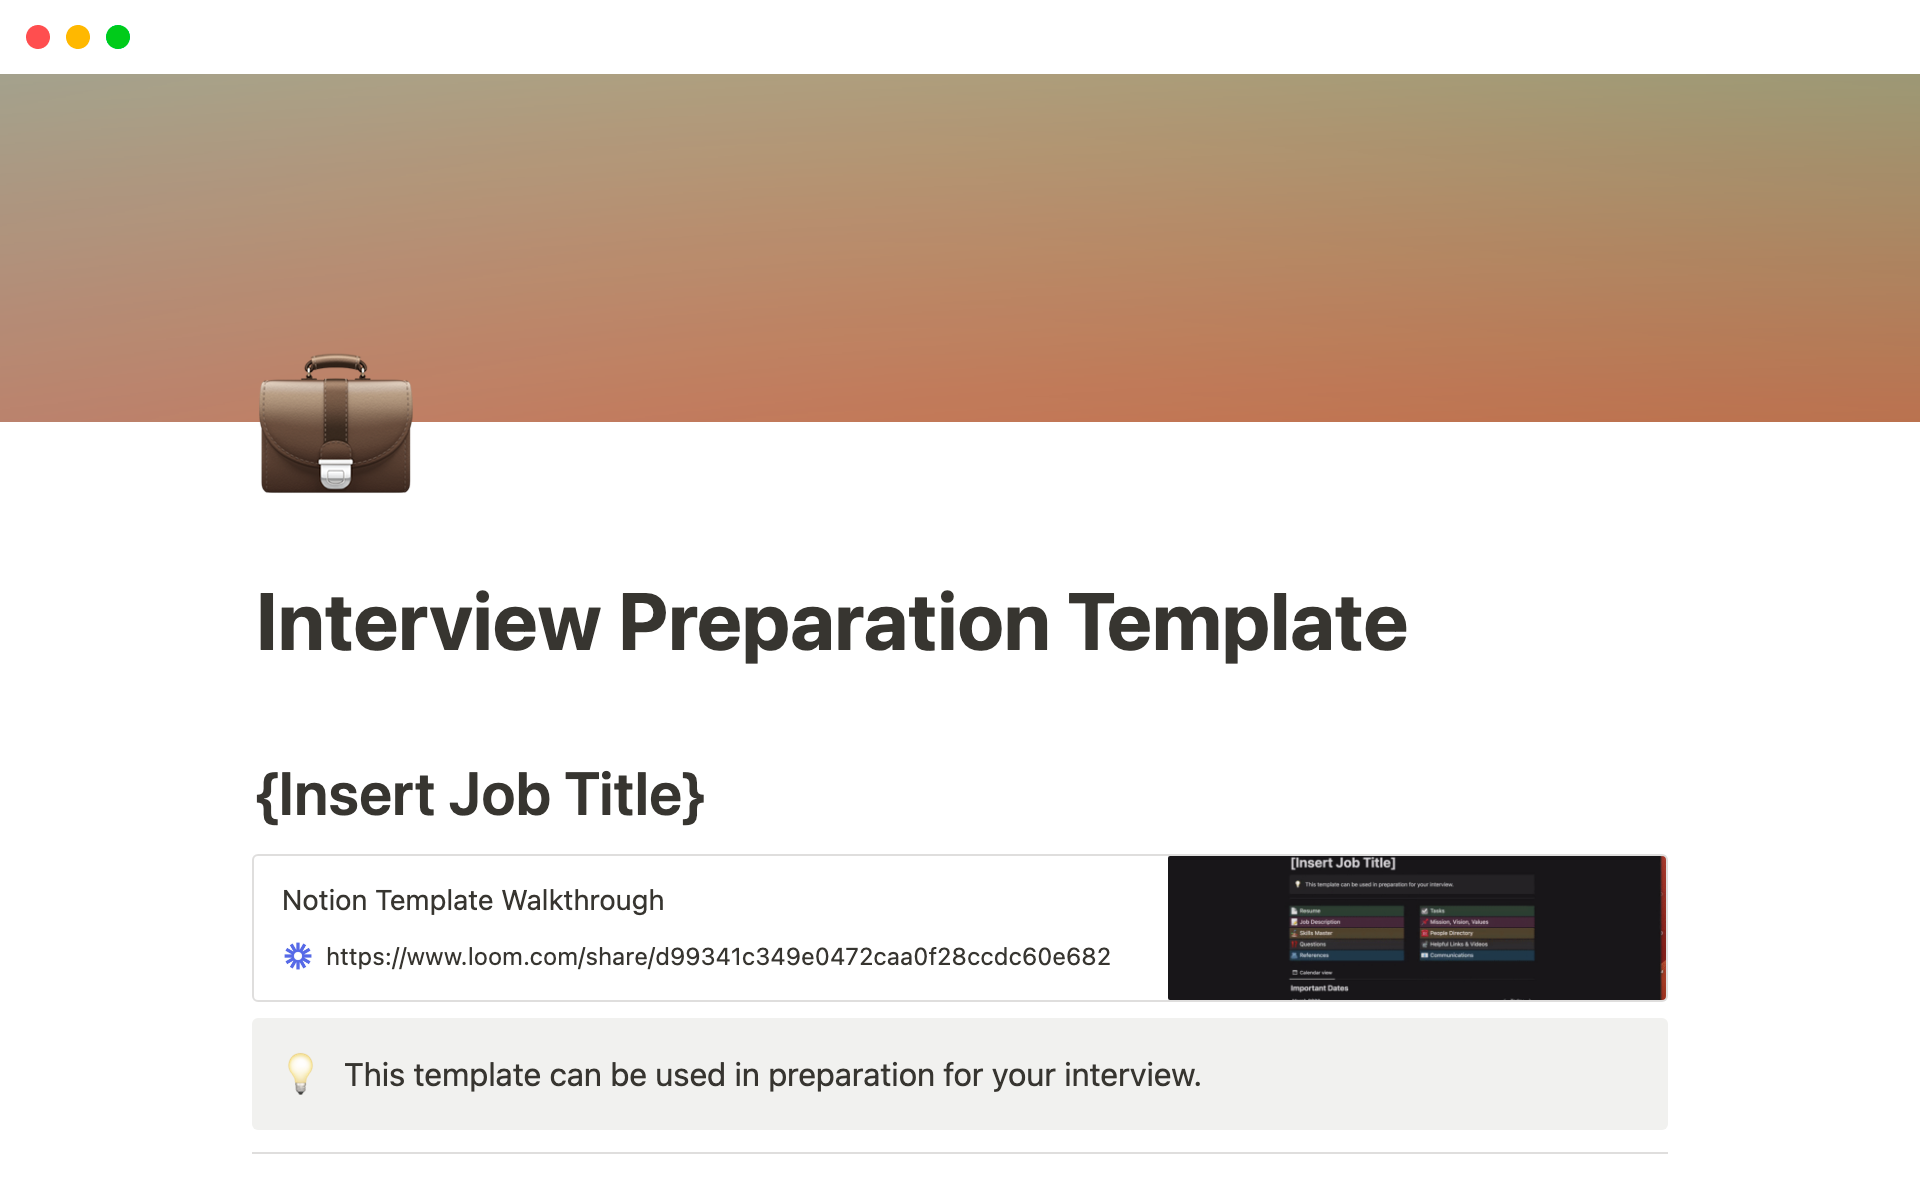 This template will help to prepare for an interview.